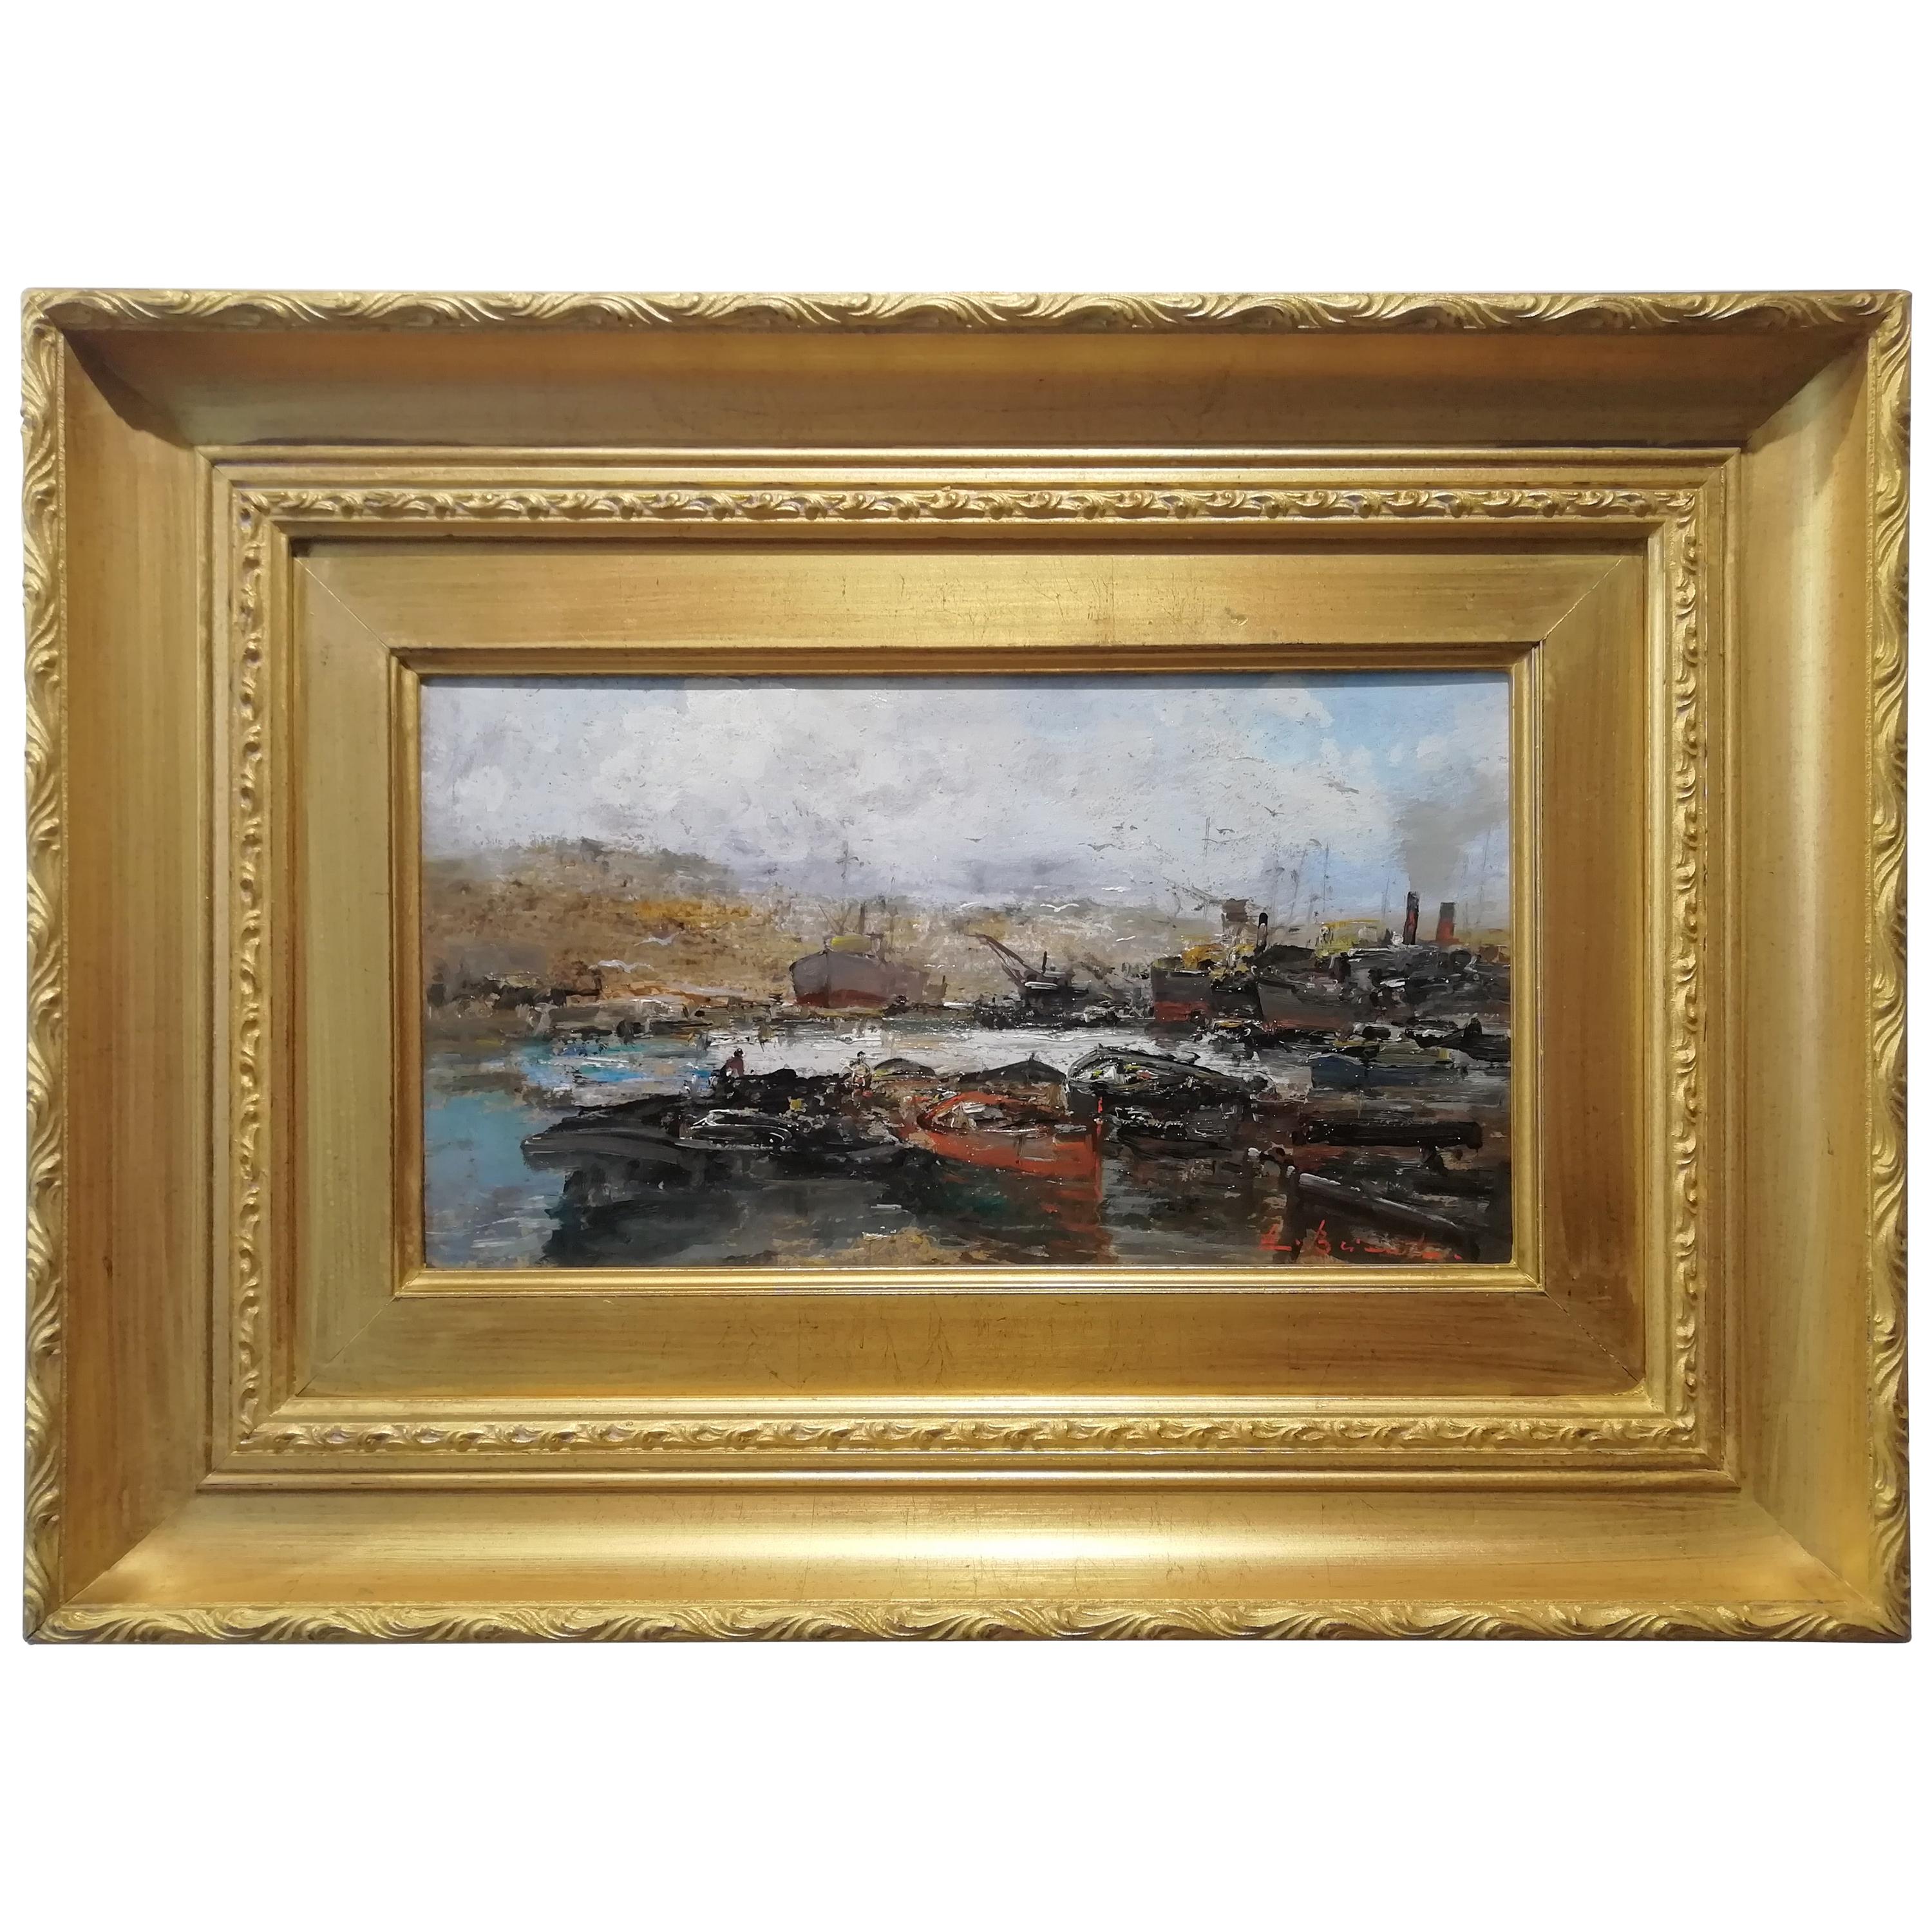 View of Harbor, Ezelino Briante Italian Painting 20 Century Marine Oil on Wood For Sale